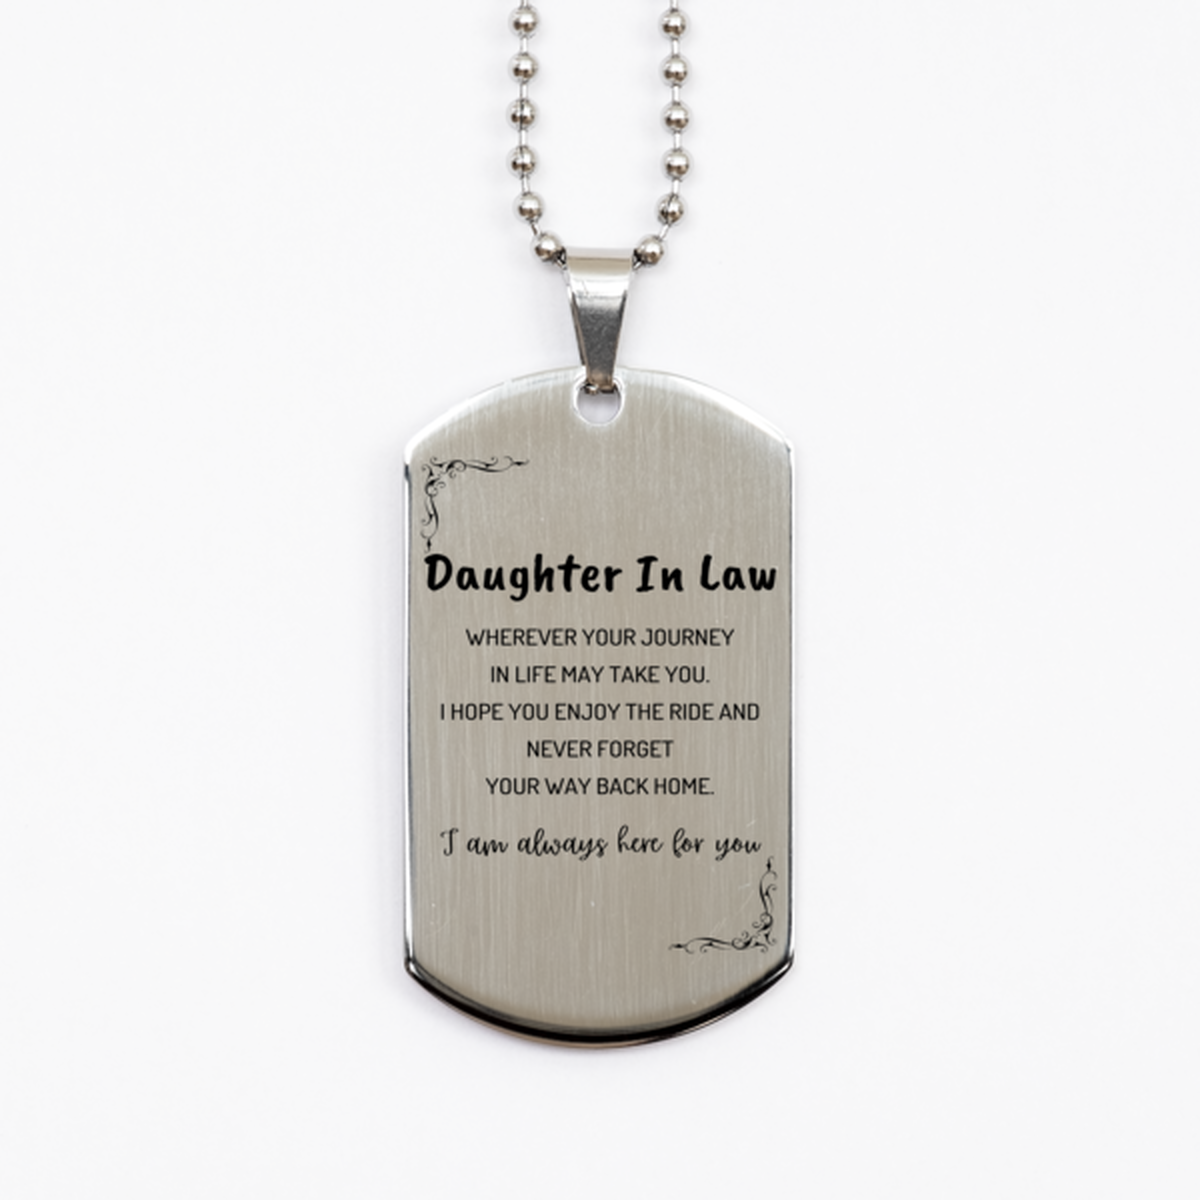 Daughter In Law wherever your journey in life may take you, I am always here for you Daughter In Law Silver Dog Tag, Awesome Christmas Gifts For Daughter In Law, Daughter In Law Birthday Gifts for Men Women Family Loved One